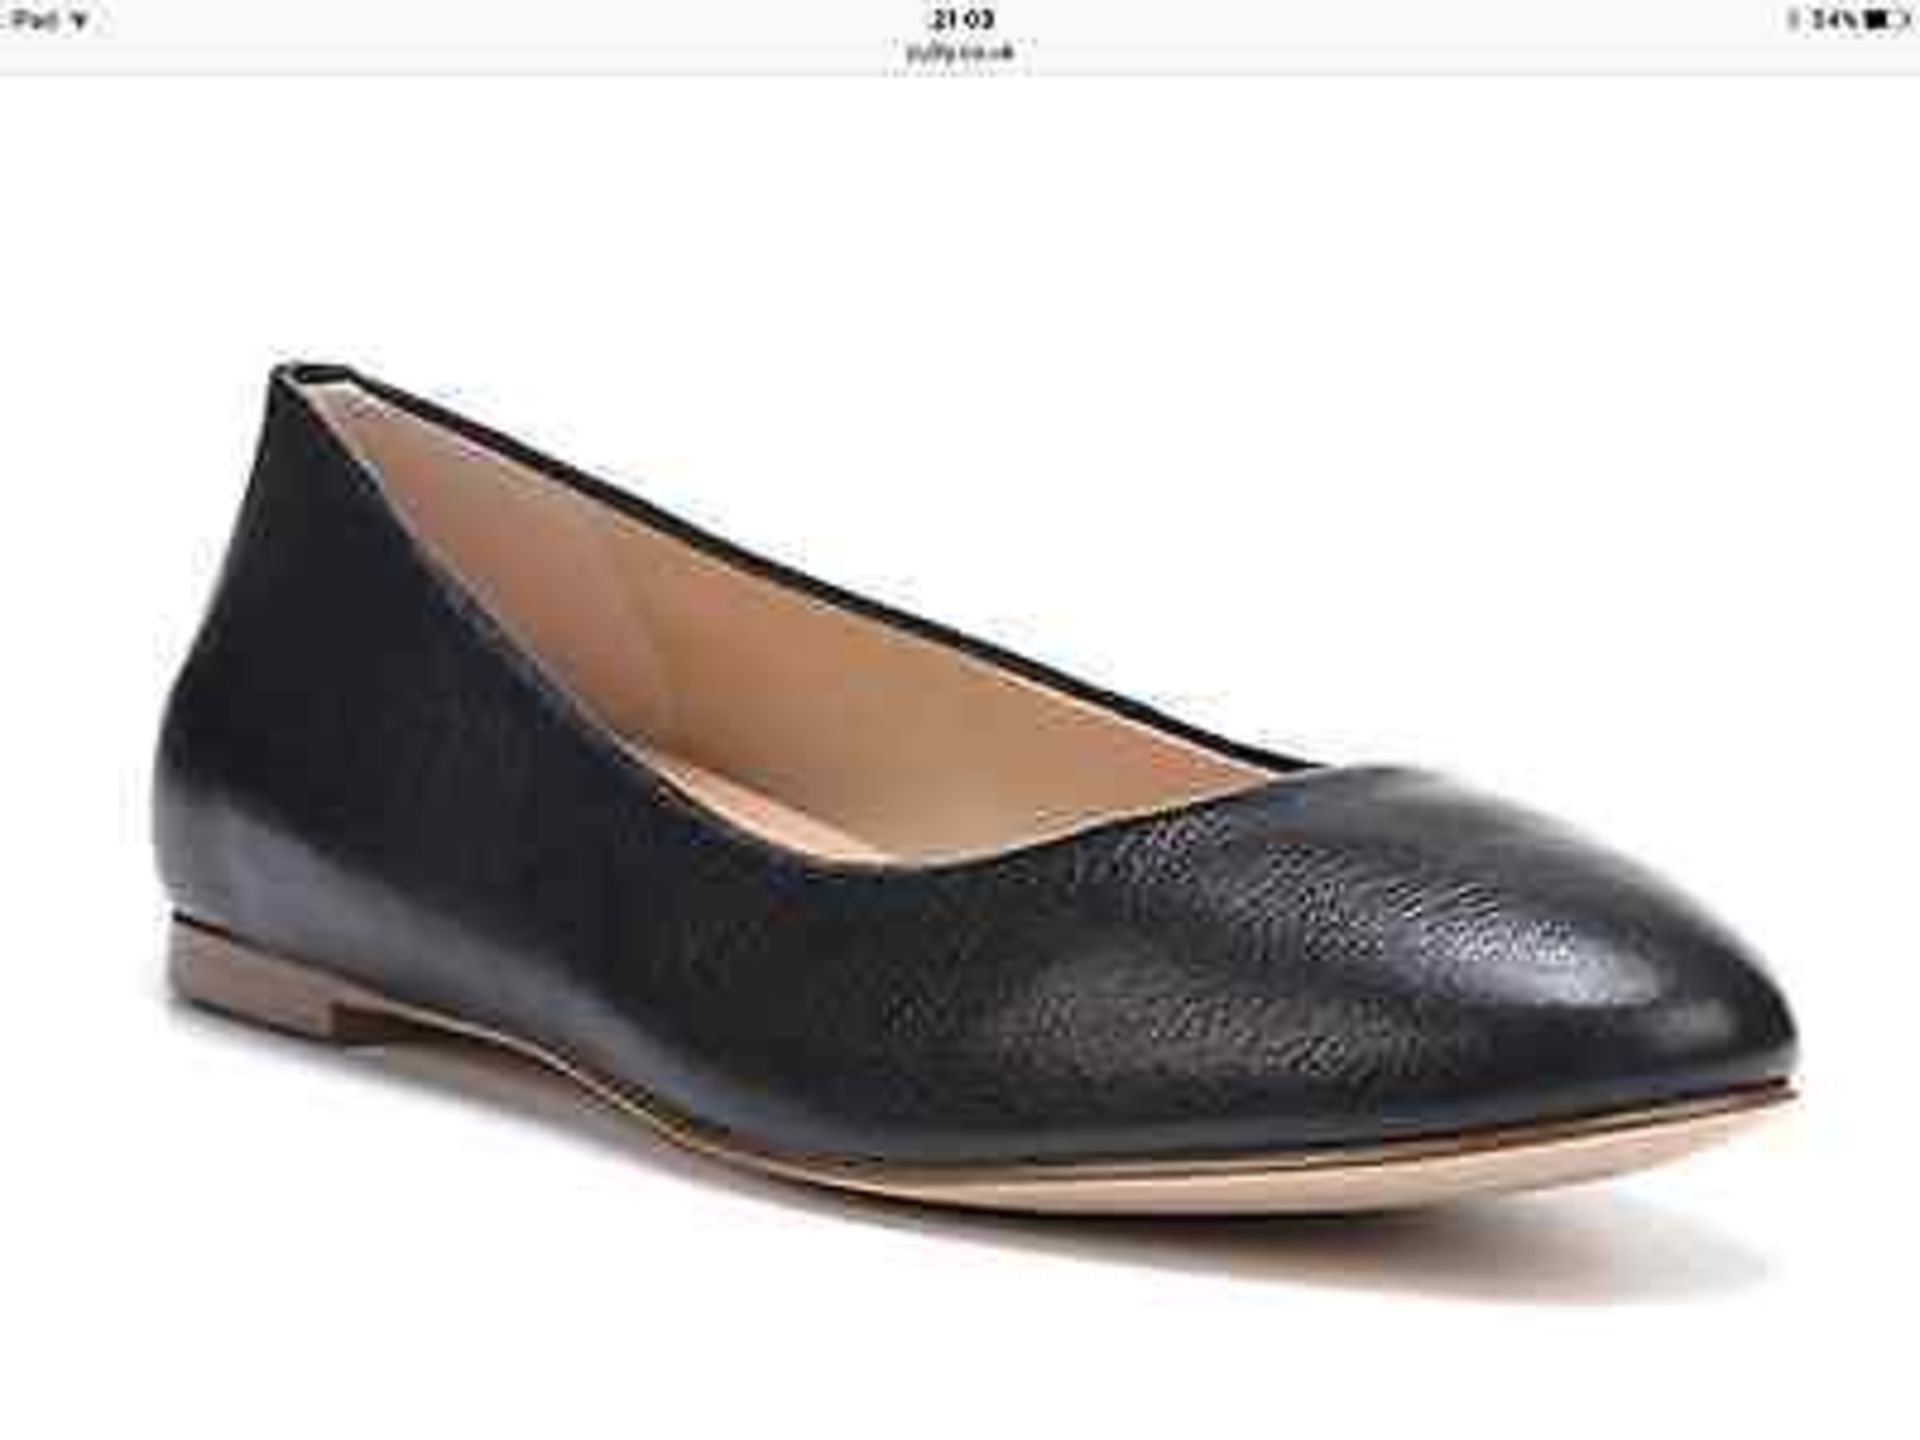 Dr Scholl's Black Vixen Leather Flat, Size 6 (New with box) - Image 7 of 8